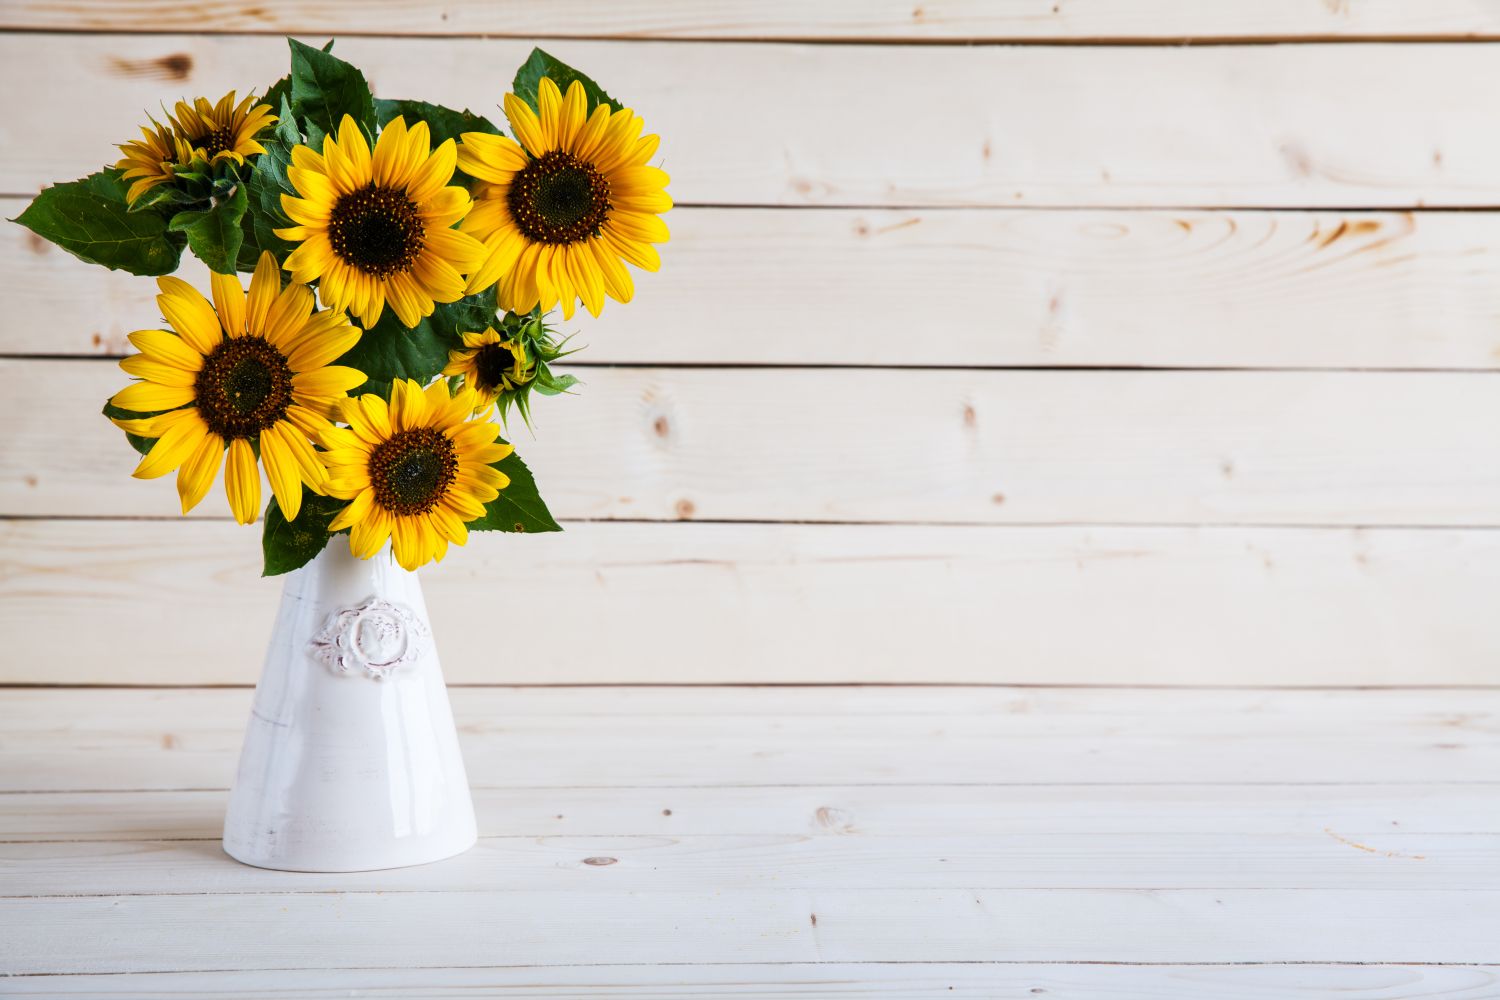 How To Arrange Sunflowers In A Vase